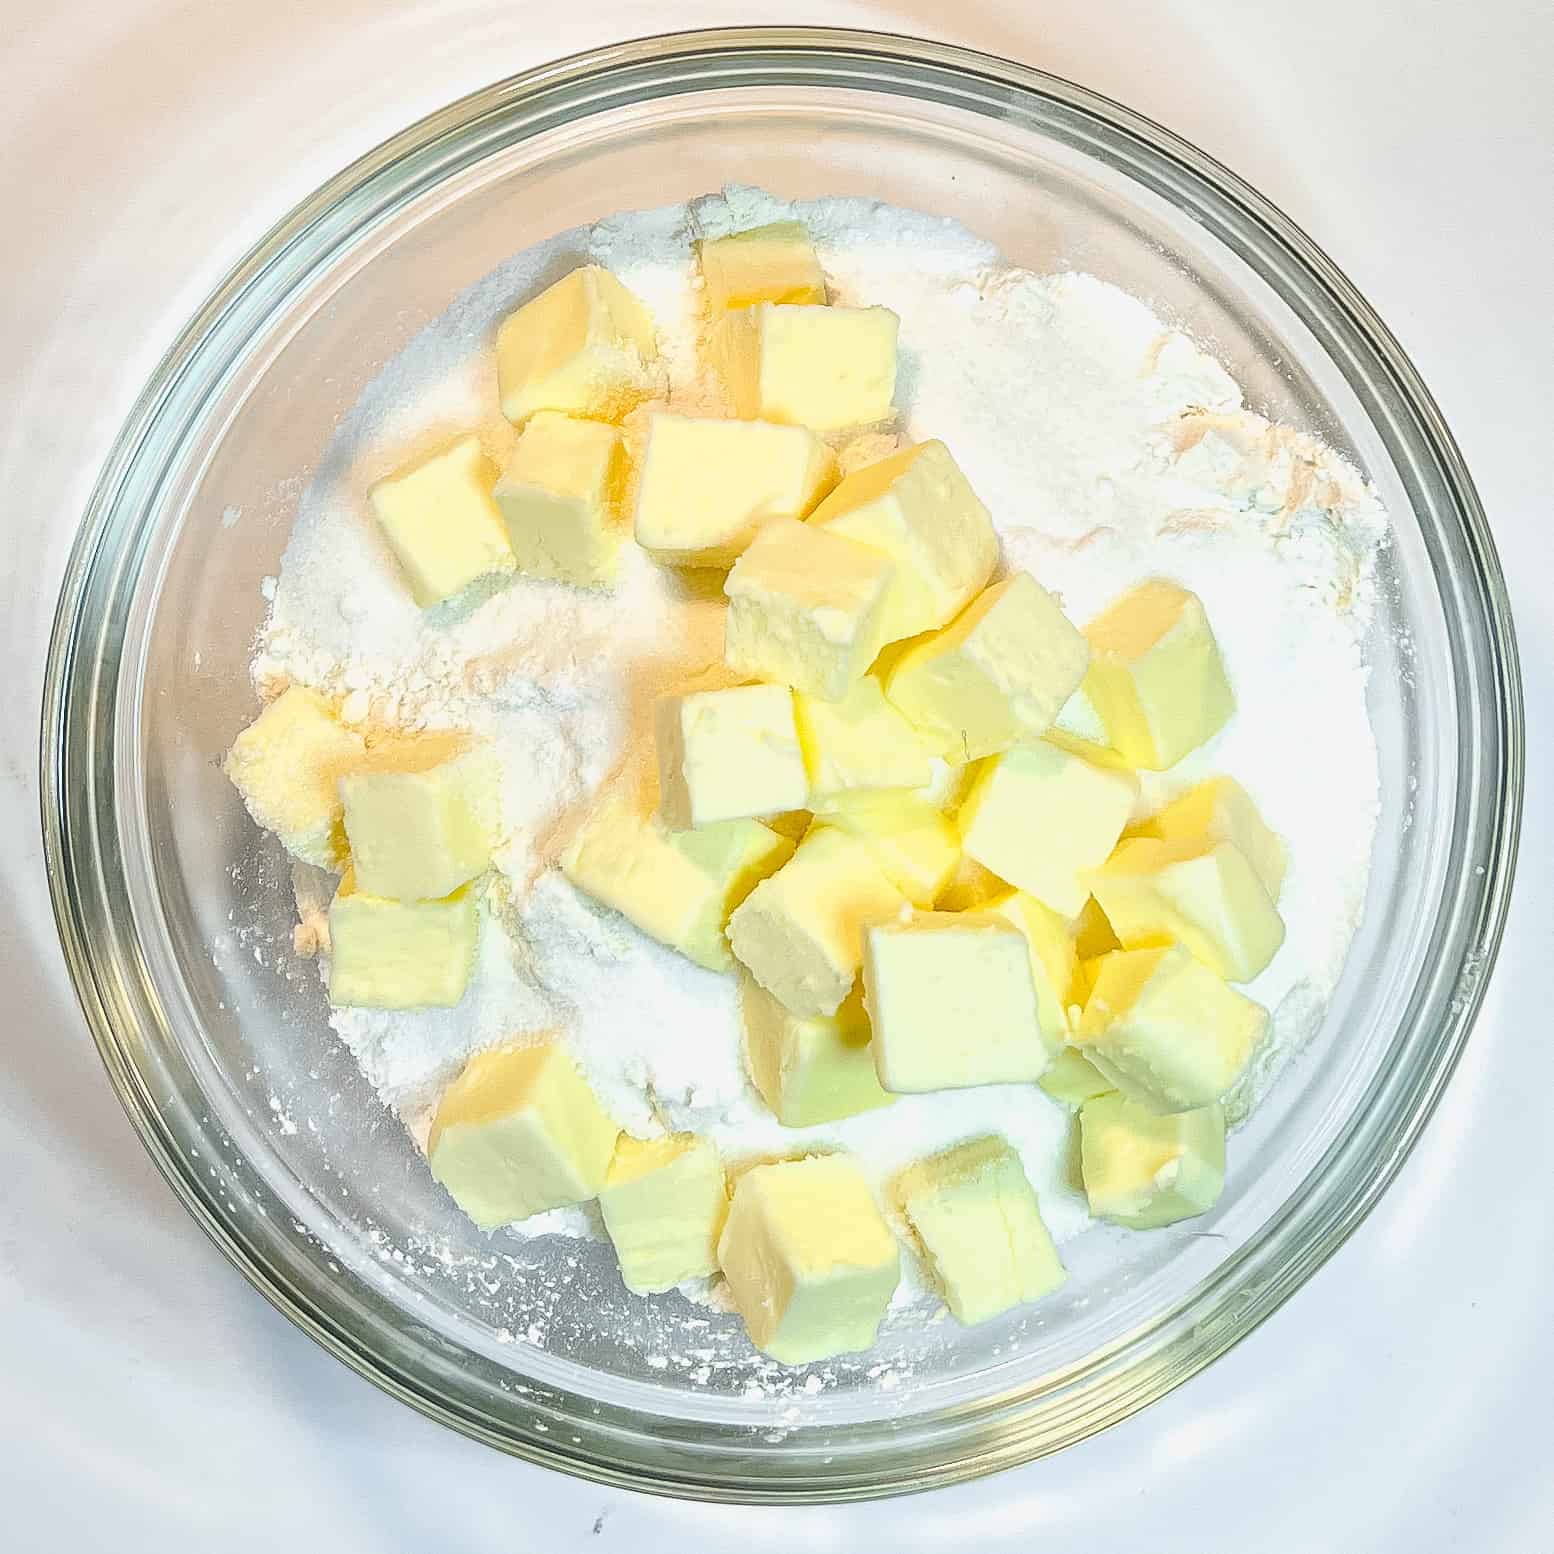 Dry ingredients and chunks of butter in a glass bowl.